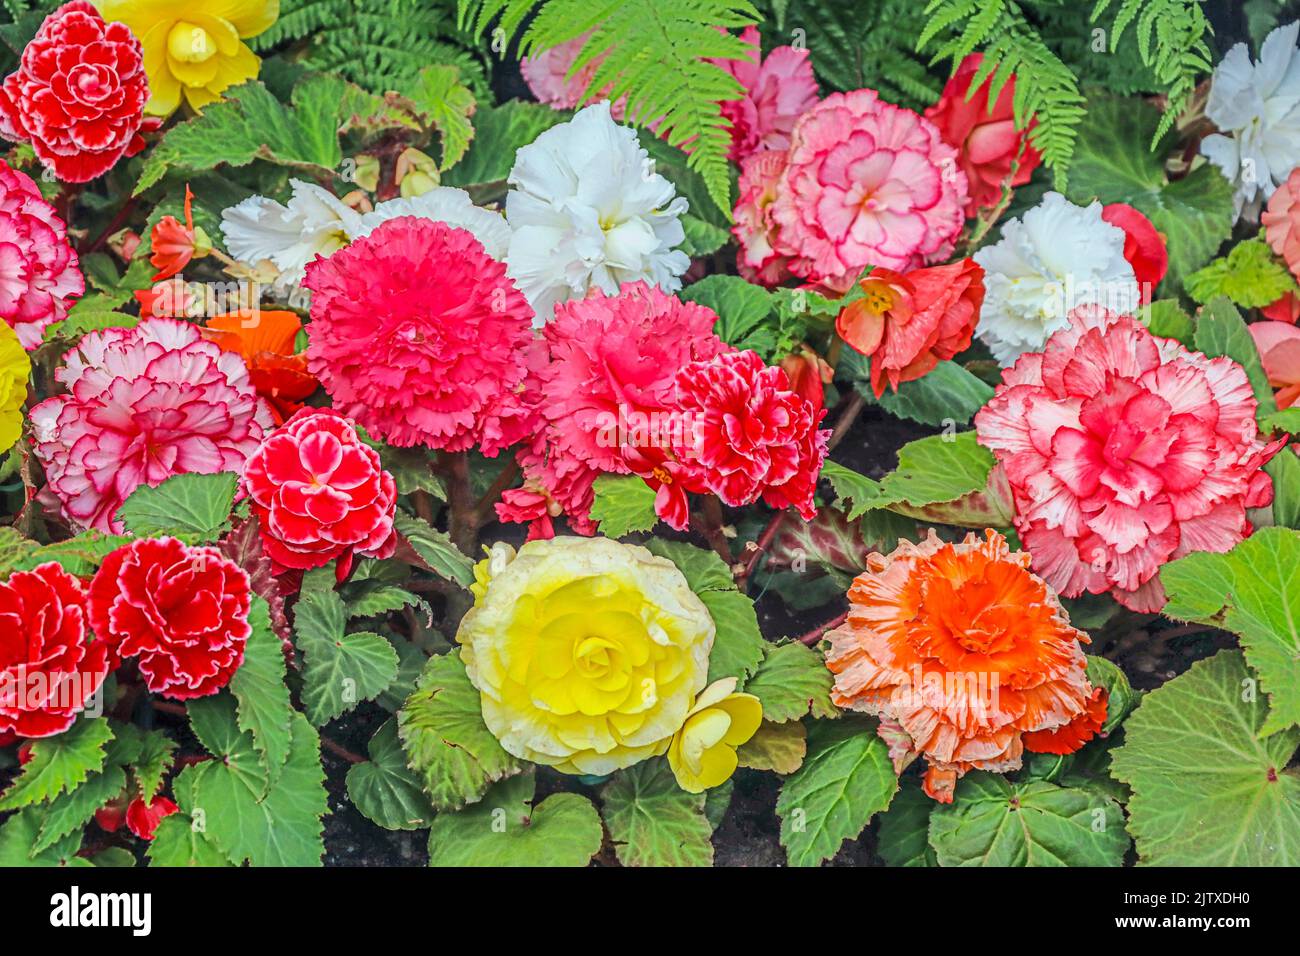 A bed of colorful Begonias (Begoniaceae) at Butchart Gardens located in Brentwood Bay, British Columbia, Canada. Stock Photo